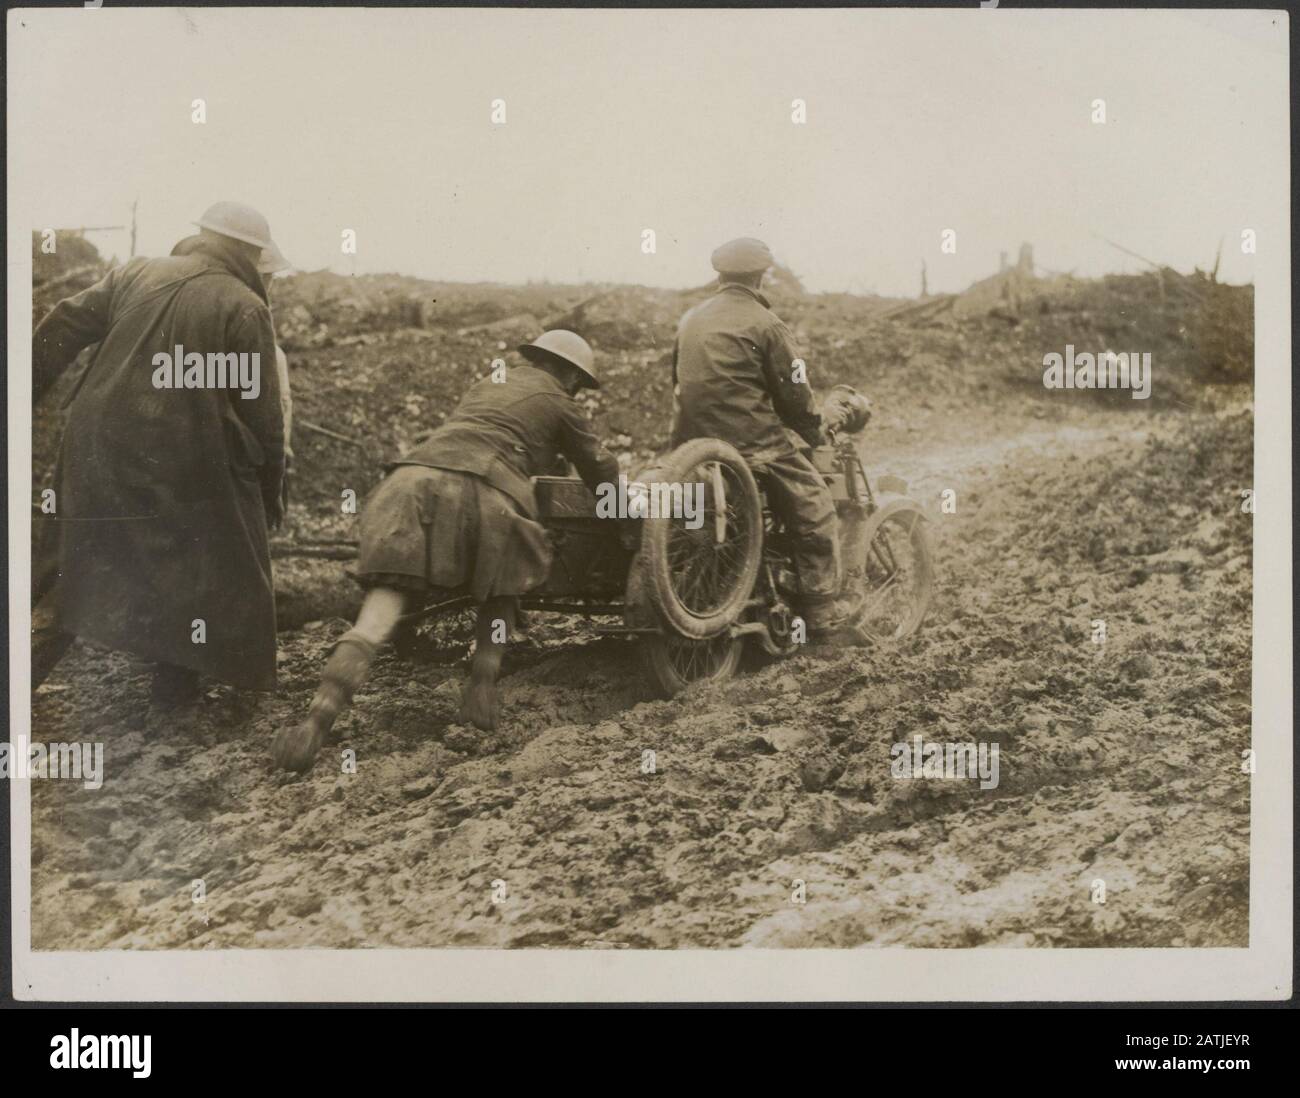 Description: A Canadian Scottie helps a motor machine gun man or a difficulty. Annotation: A Canadian 'Scottie' helps a soldier on a motorcycle with pushing in the mud. Date: {1914-1918} Keywords: WWI, mud, motorcycles, military, transport Stock Photo